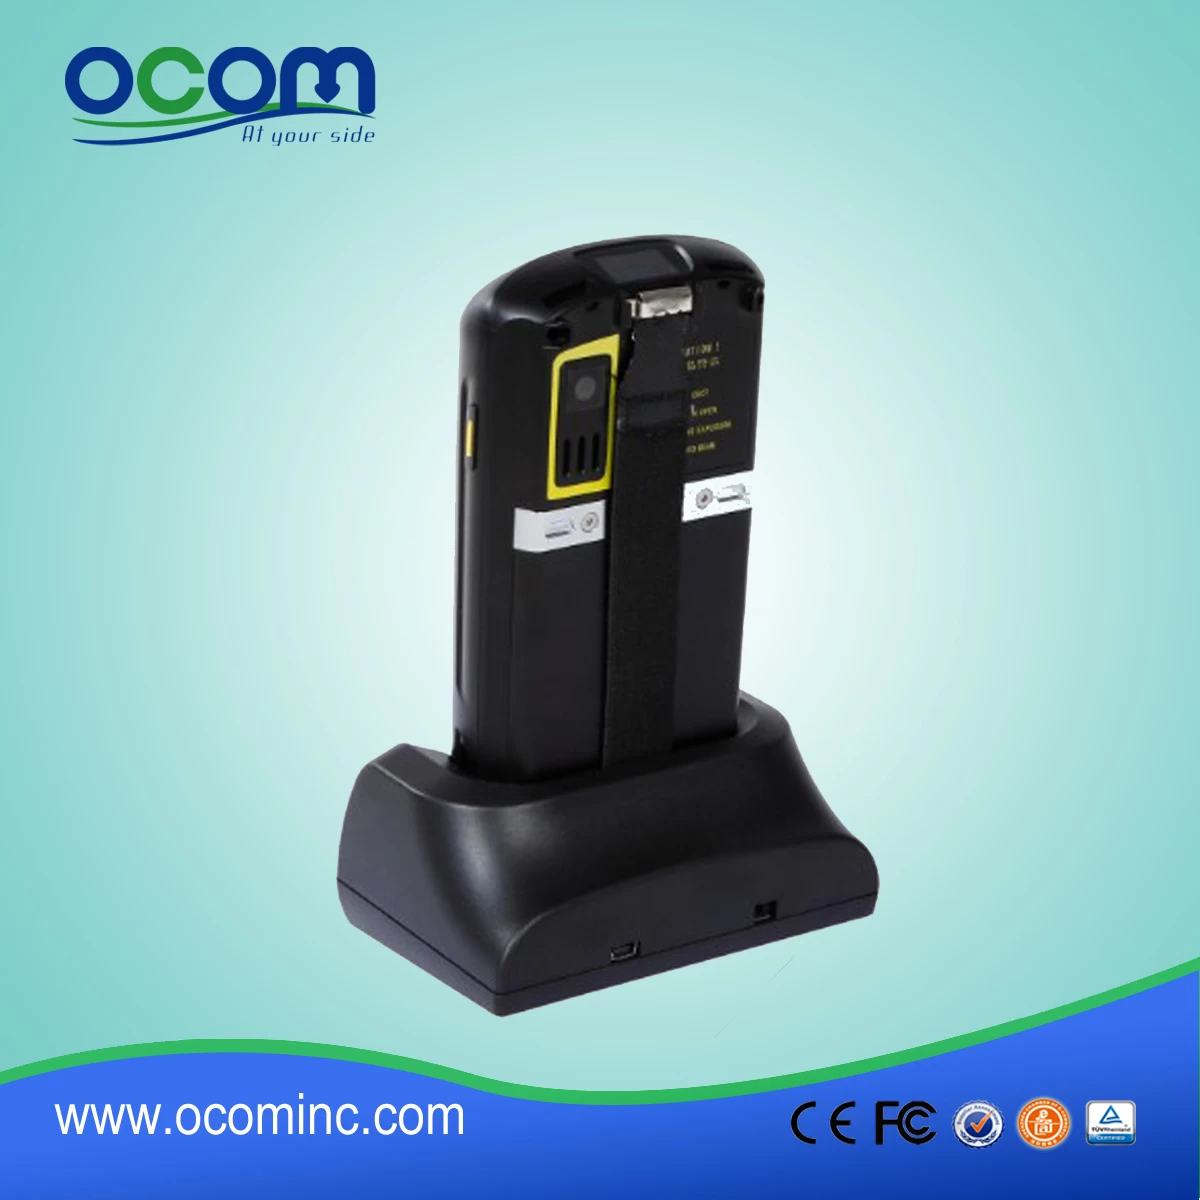 (OCBS-D008) Wi-Fi and Bluetooth Handheld Rugged Data Collector Industrial PDA